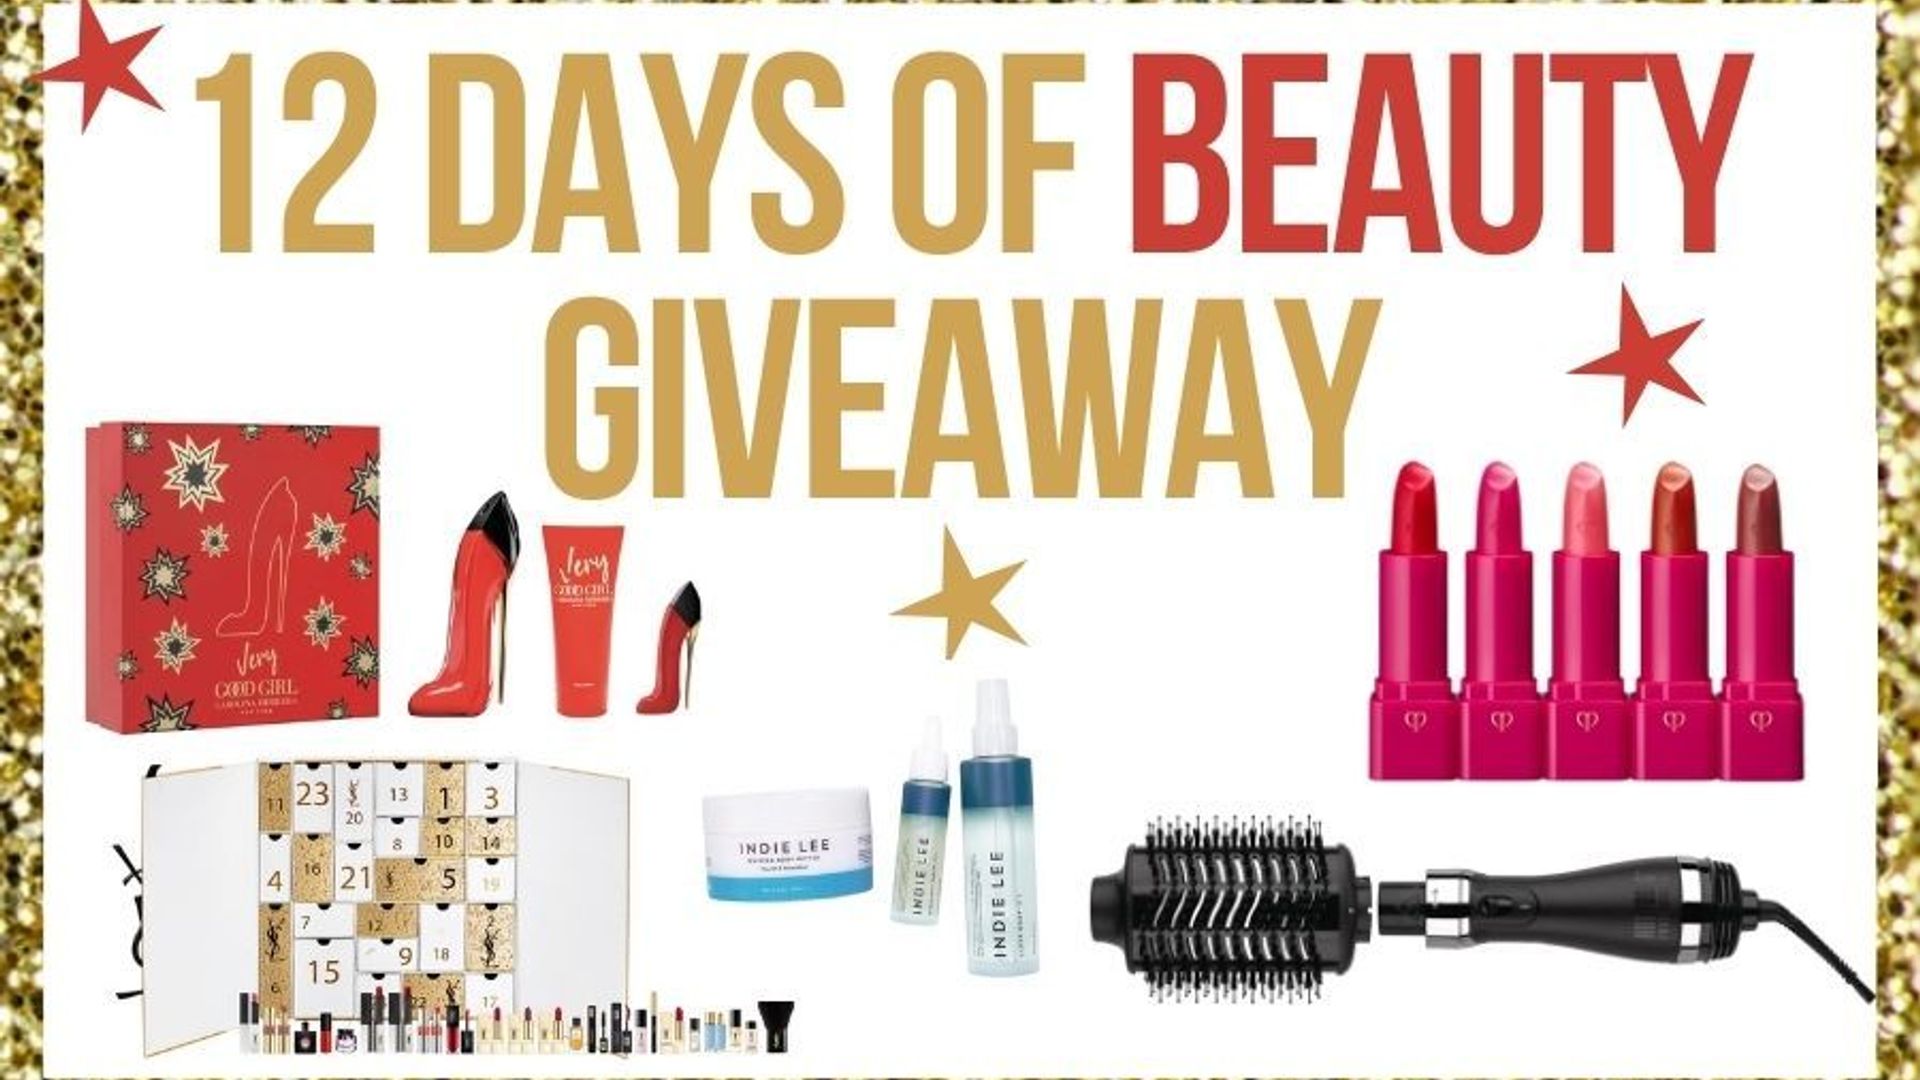 12 Days of Beauty Giveaways with Carolina Herrera, Hot Tools, The Detox Market and more!